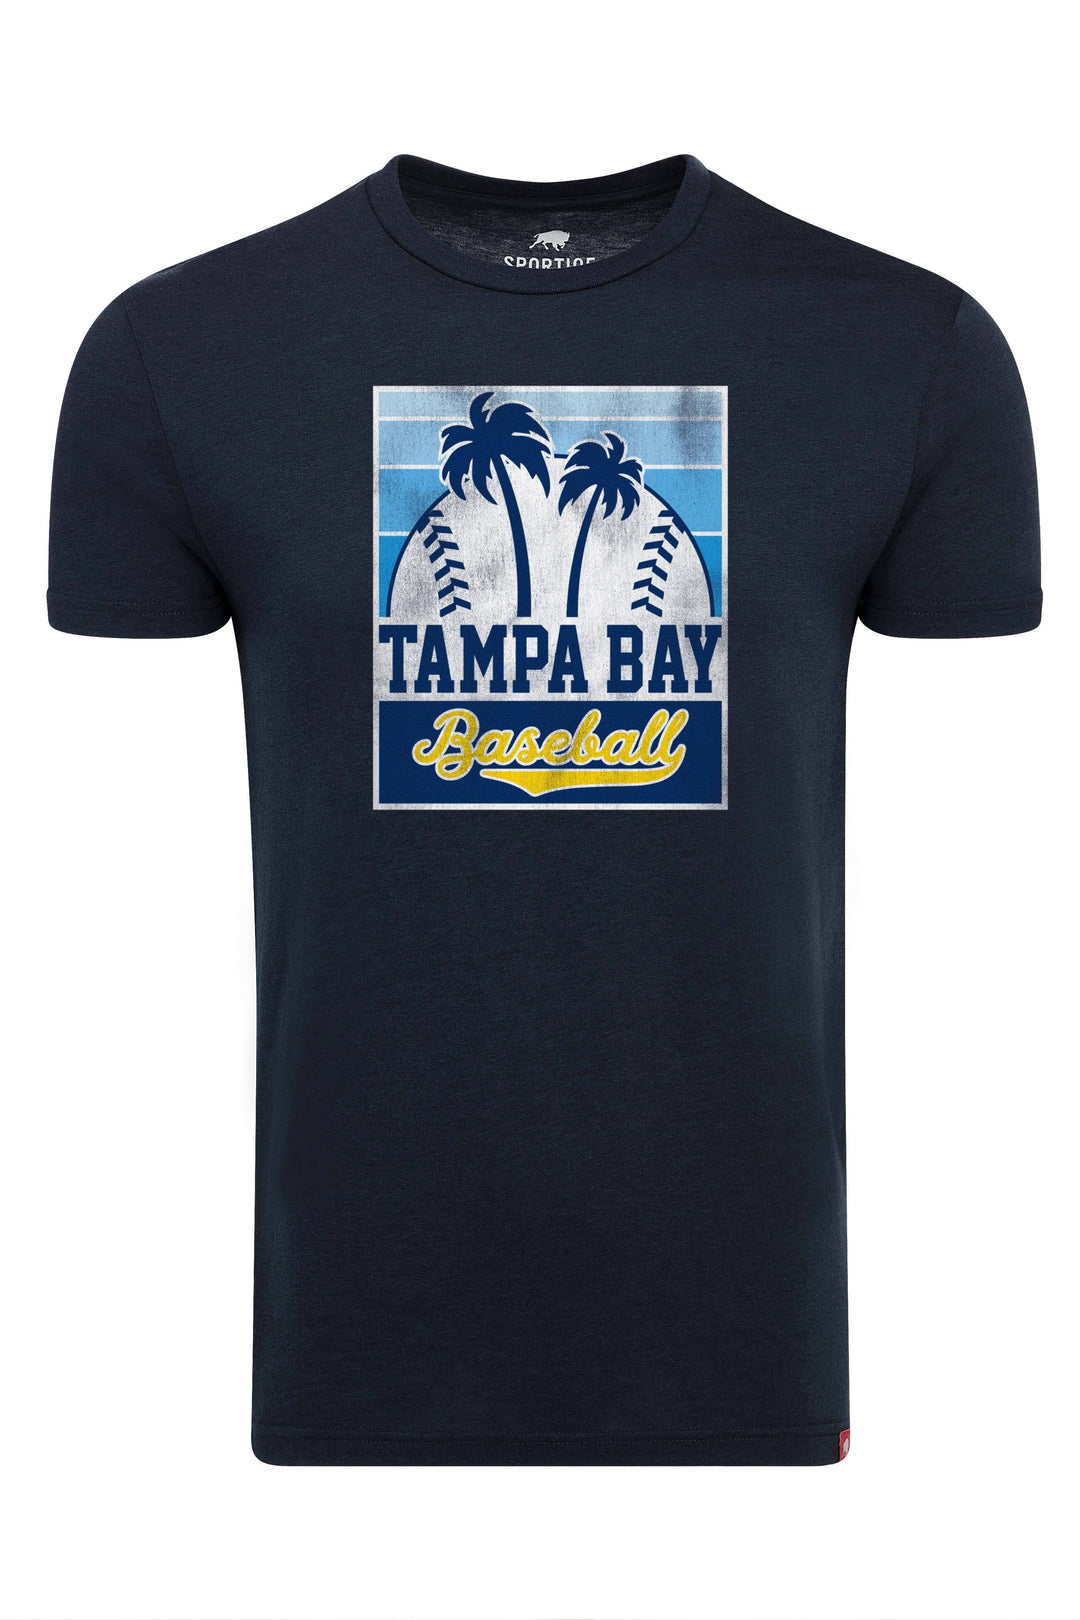 NAVY TAMPA BAY BASEBALL PALM TREES SPORTIQE T-SHIRT - The Bay Republic | Team Store of the Tampa Bay Rays & Rowdies